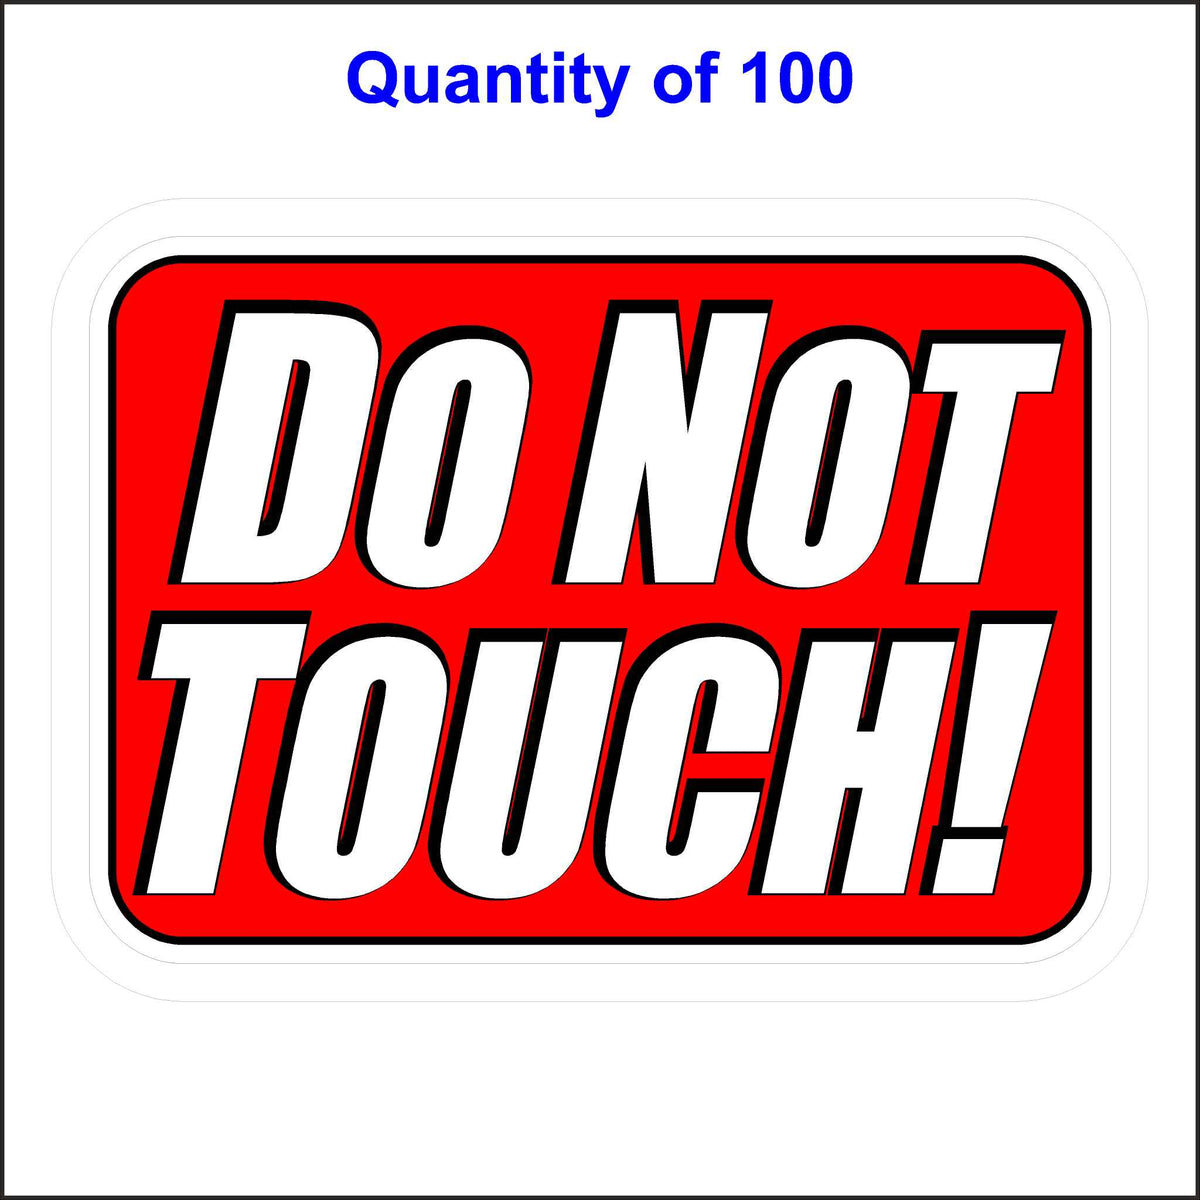 Do Not Touch Sticker With a Red Background and White Letters. 100 Quantity.